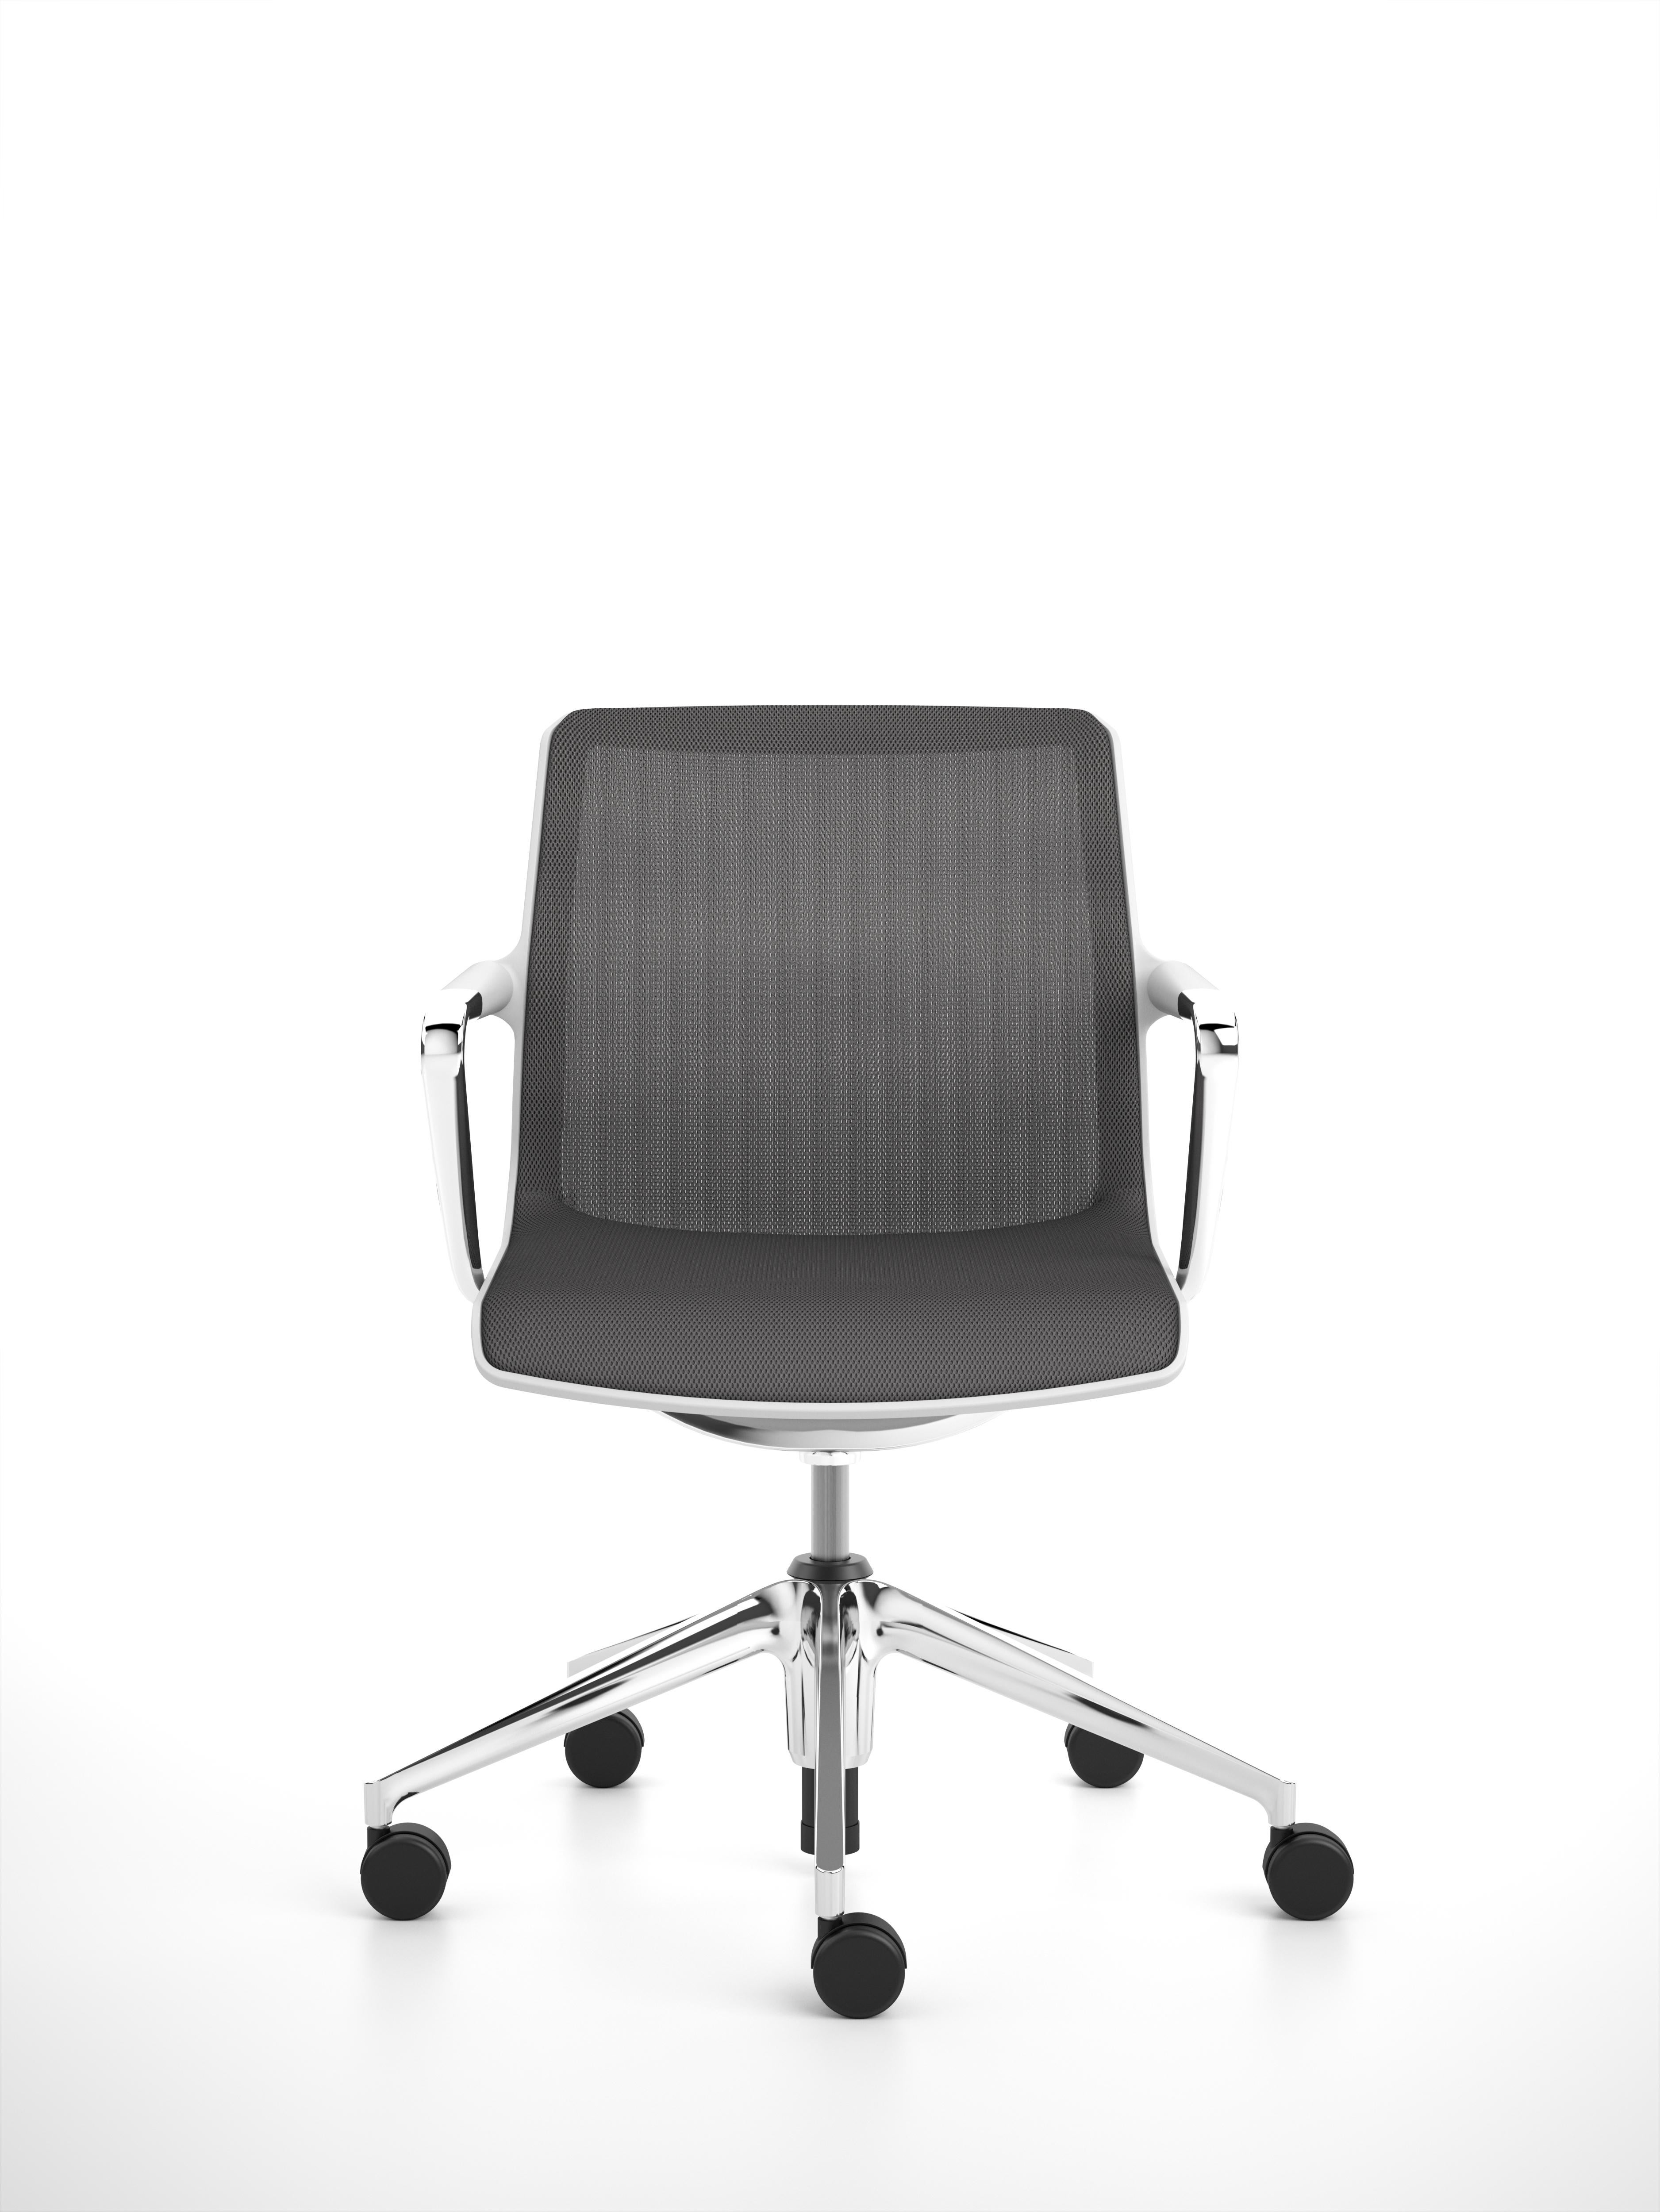 These items are currently only available in the United States.

The Unix chair by Antonio Citterio is available with a sturdy five-star base on castors, ideal for studio offices and informal office areas. The height-adjustable, swivel chair comes